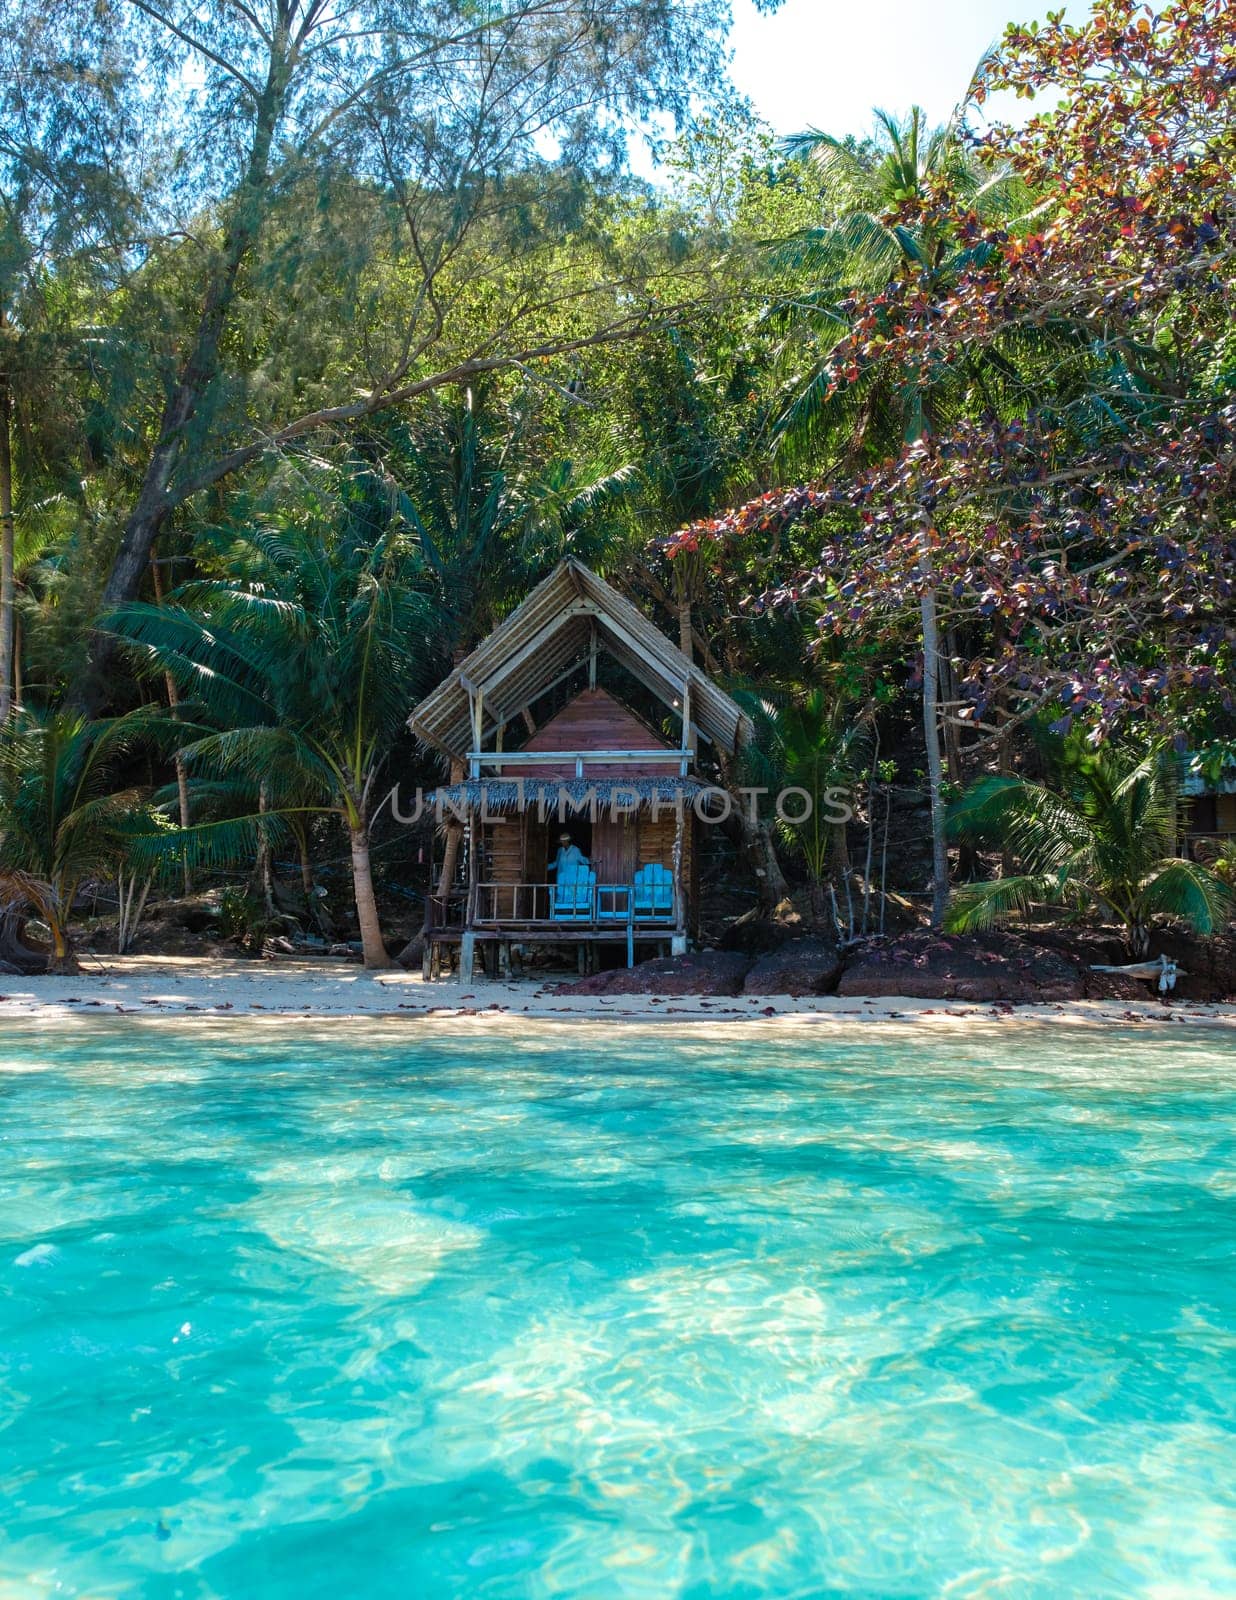 Koh Wai Island Trat Thailand is a tinny tropical Island near Koh Chang. wooden bamboo hut bungalow on the beach on a sunny day